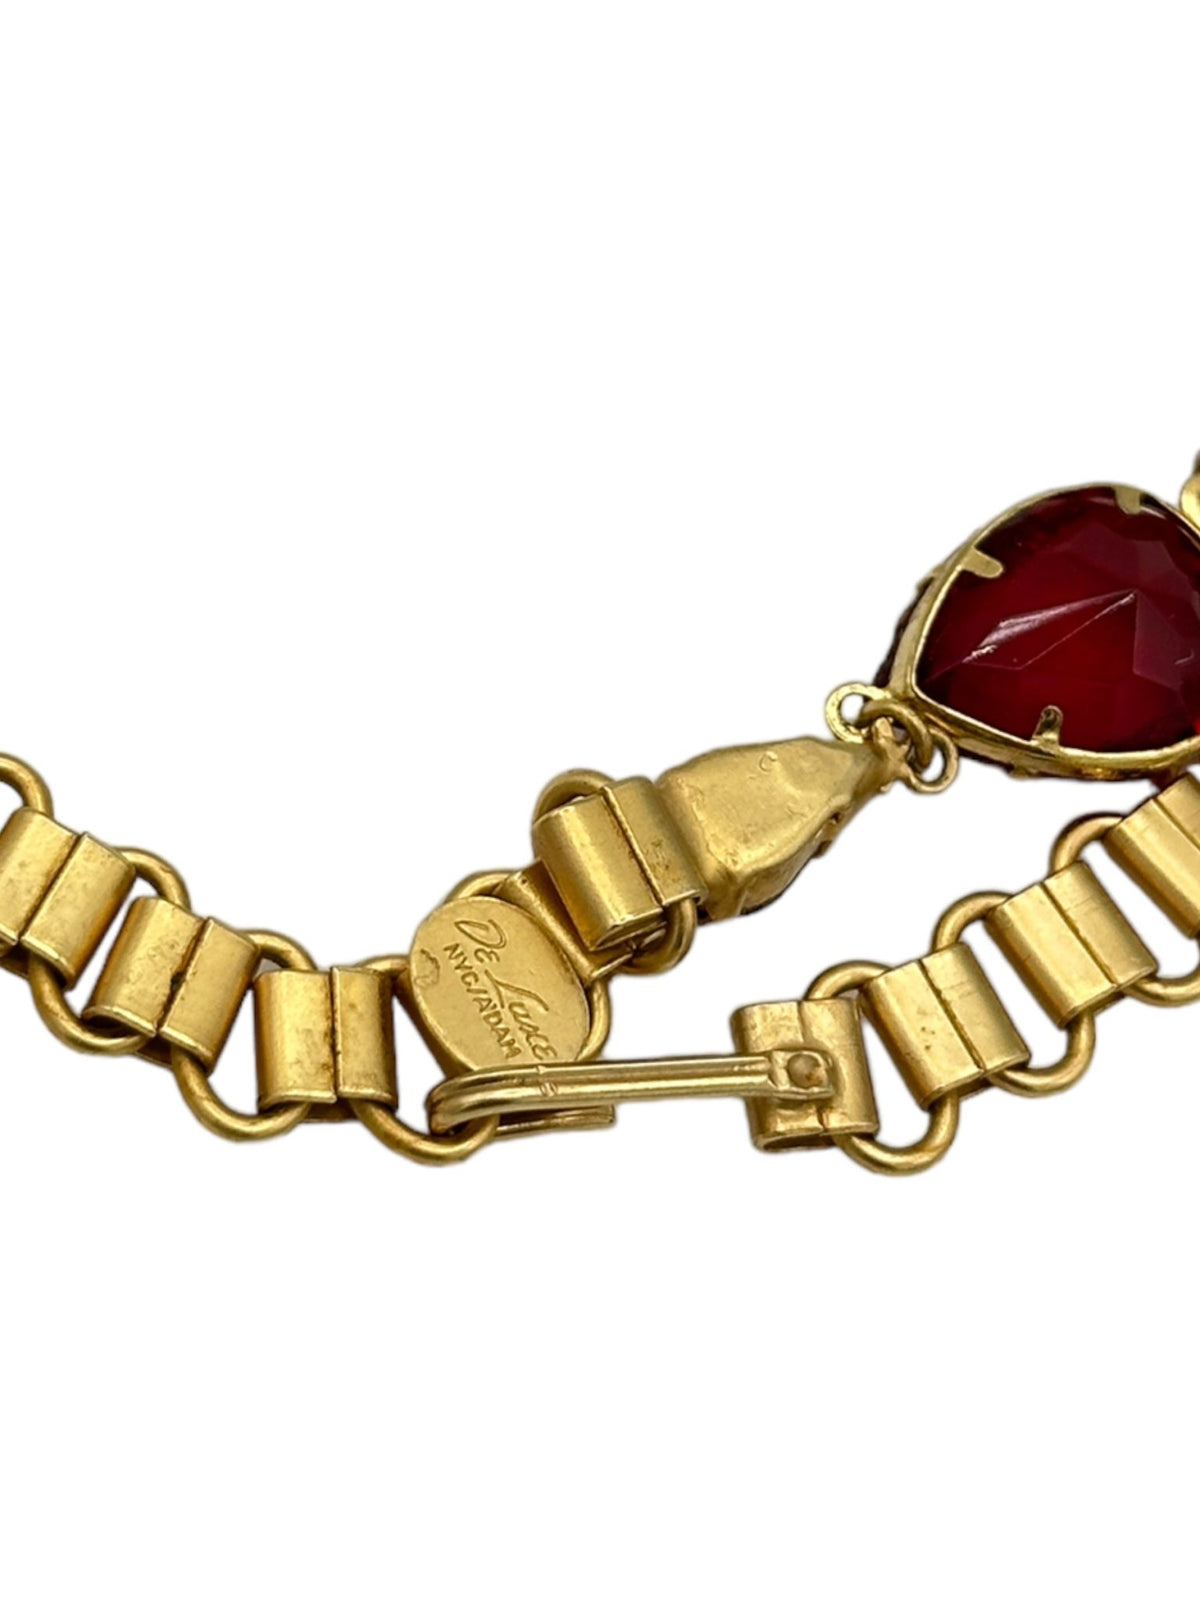 De Luxe NYC A’Dam Citrine Yellow & Ruby Red Rhinestone Statement Necklace - 24 Wishes Vintage Jewelry